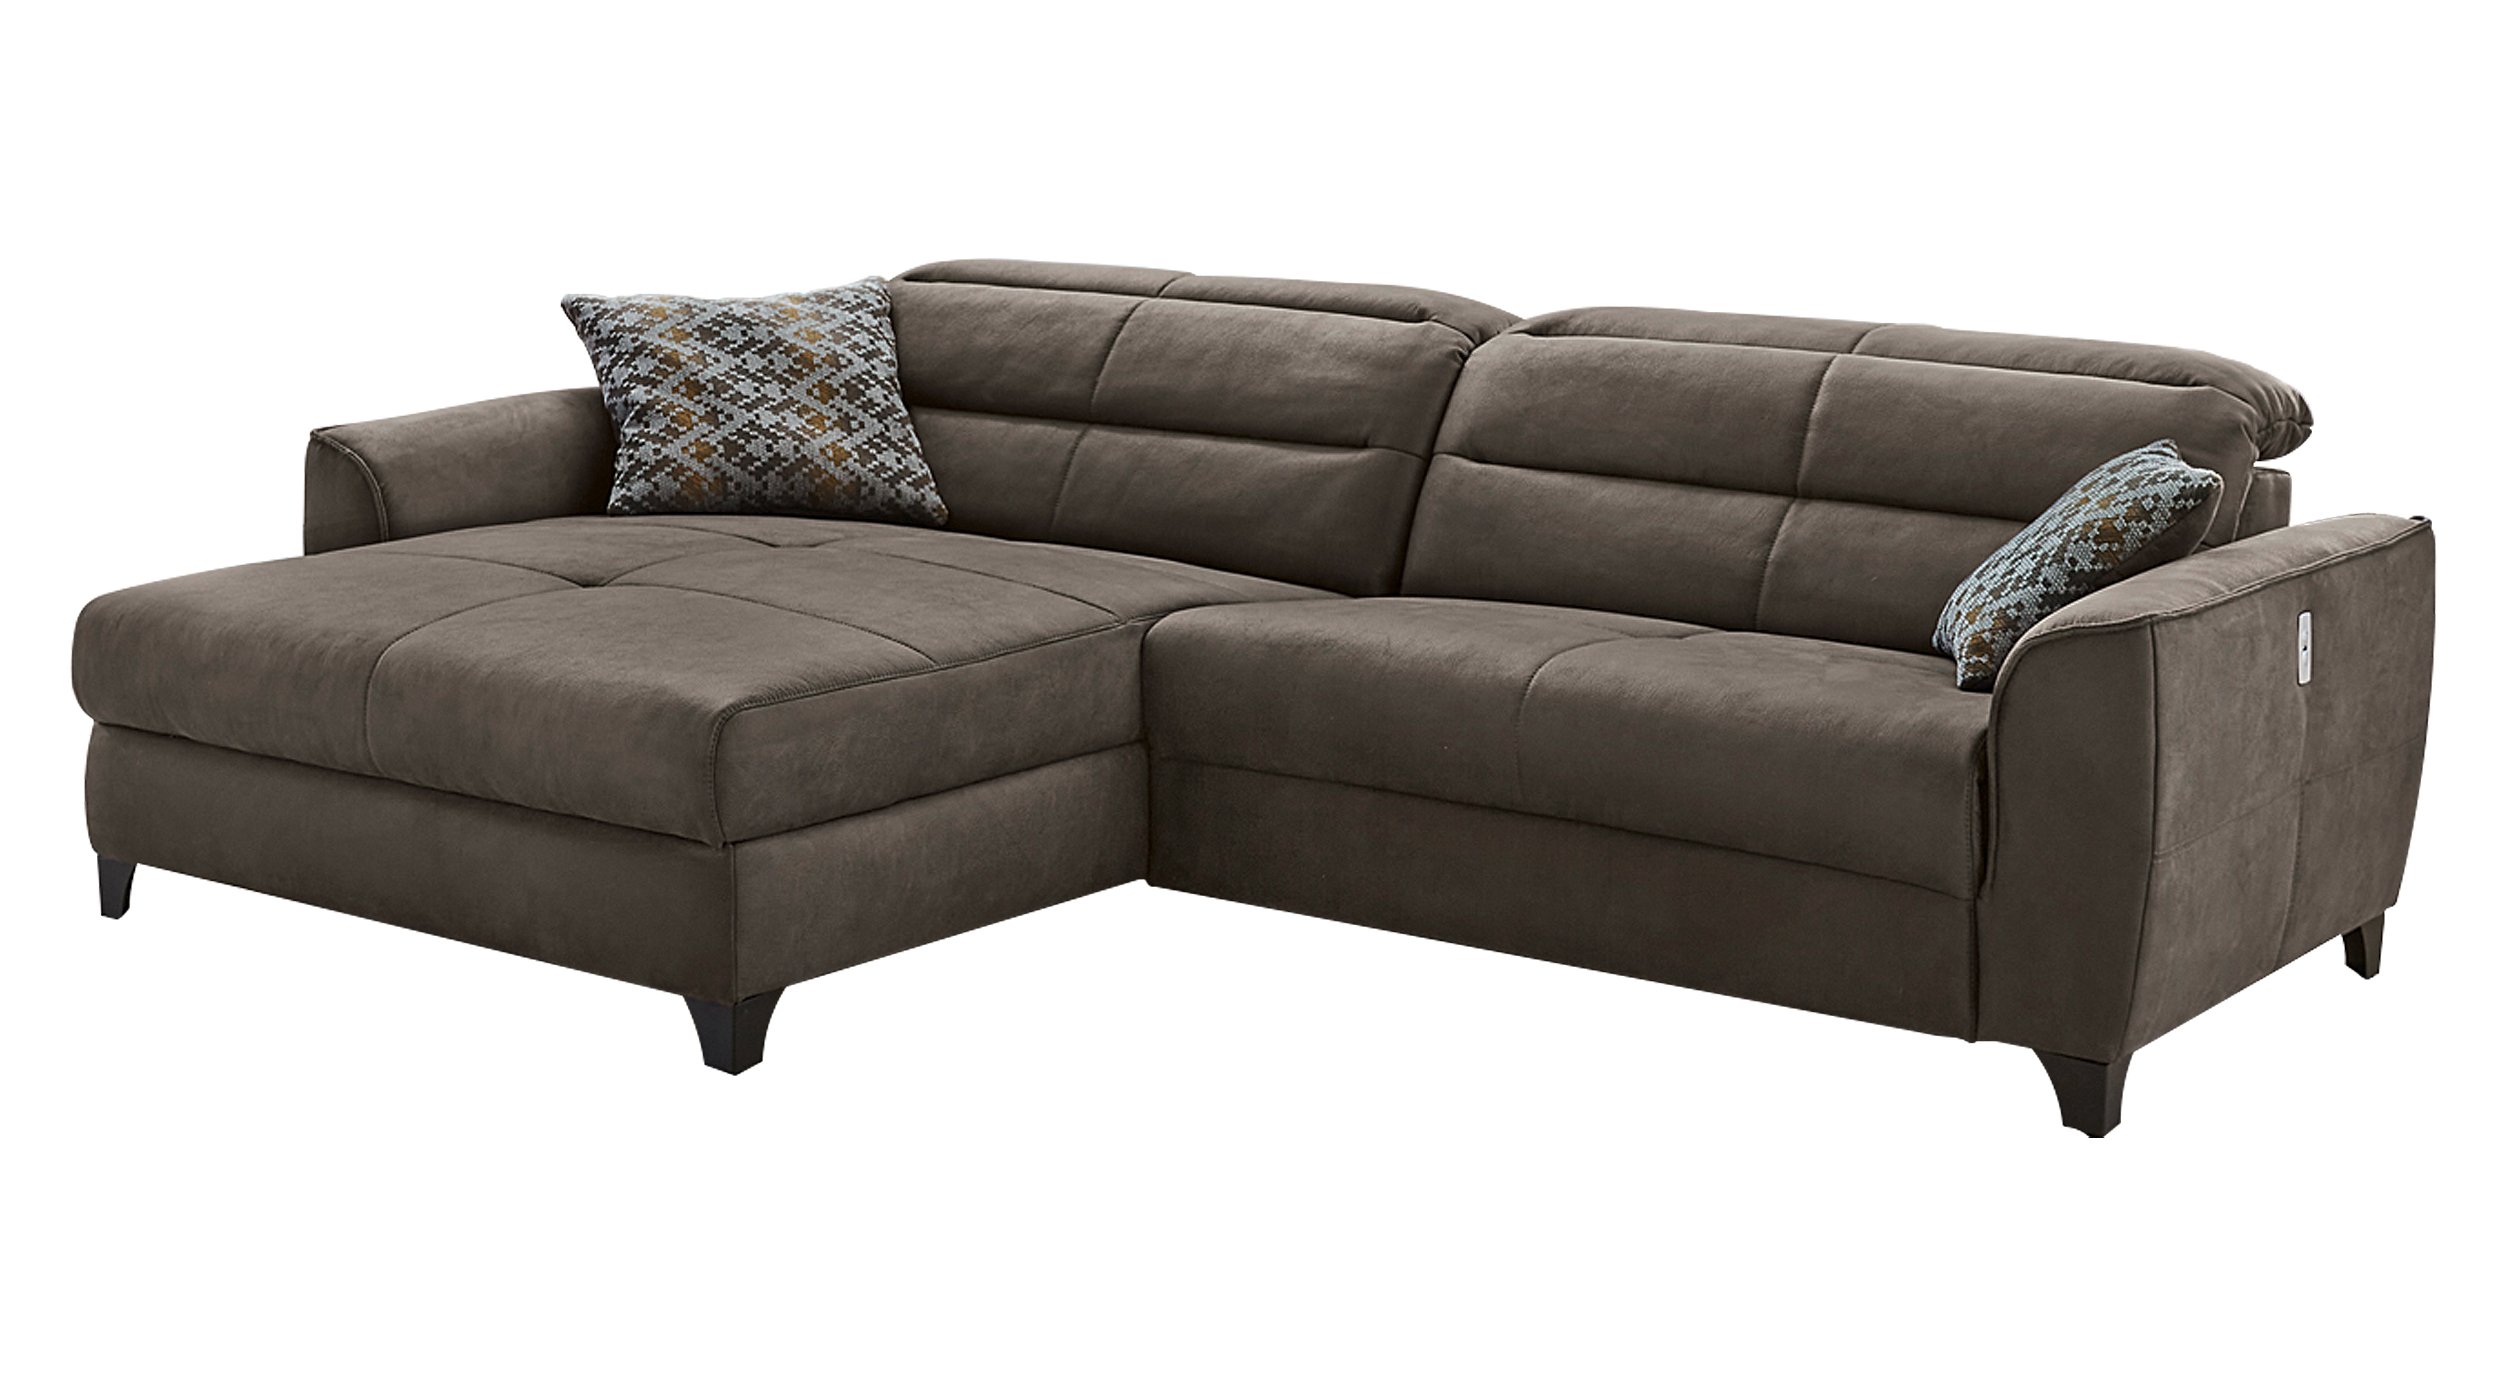 Ecksofa mit Relaxfunktion braun 289 x 184 cm - DOUBLE-ONE